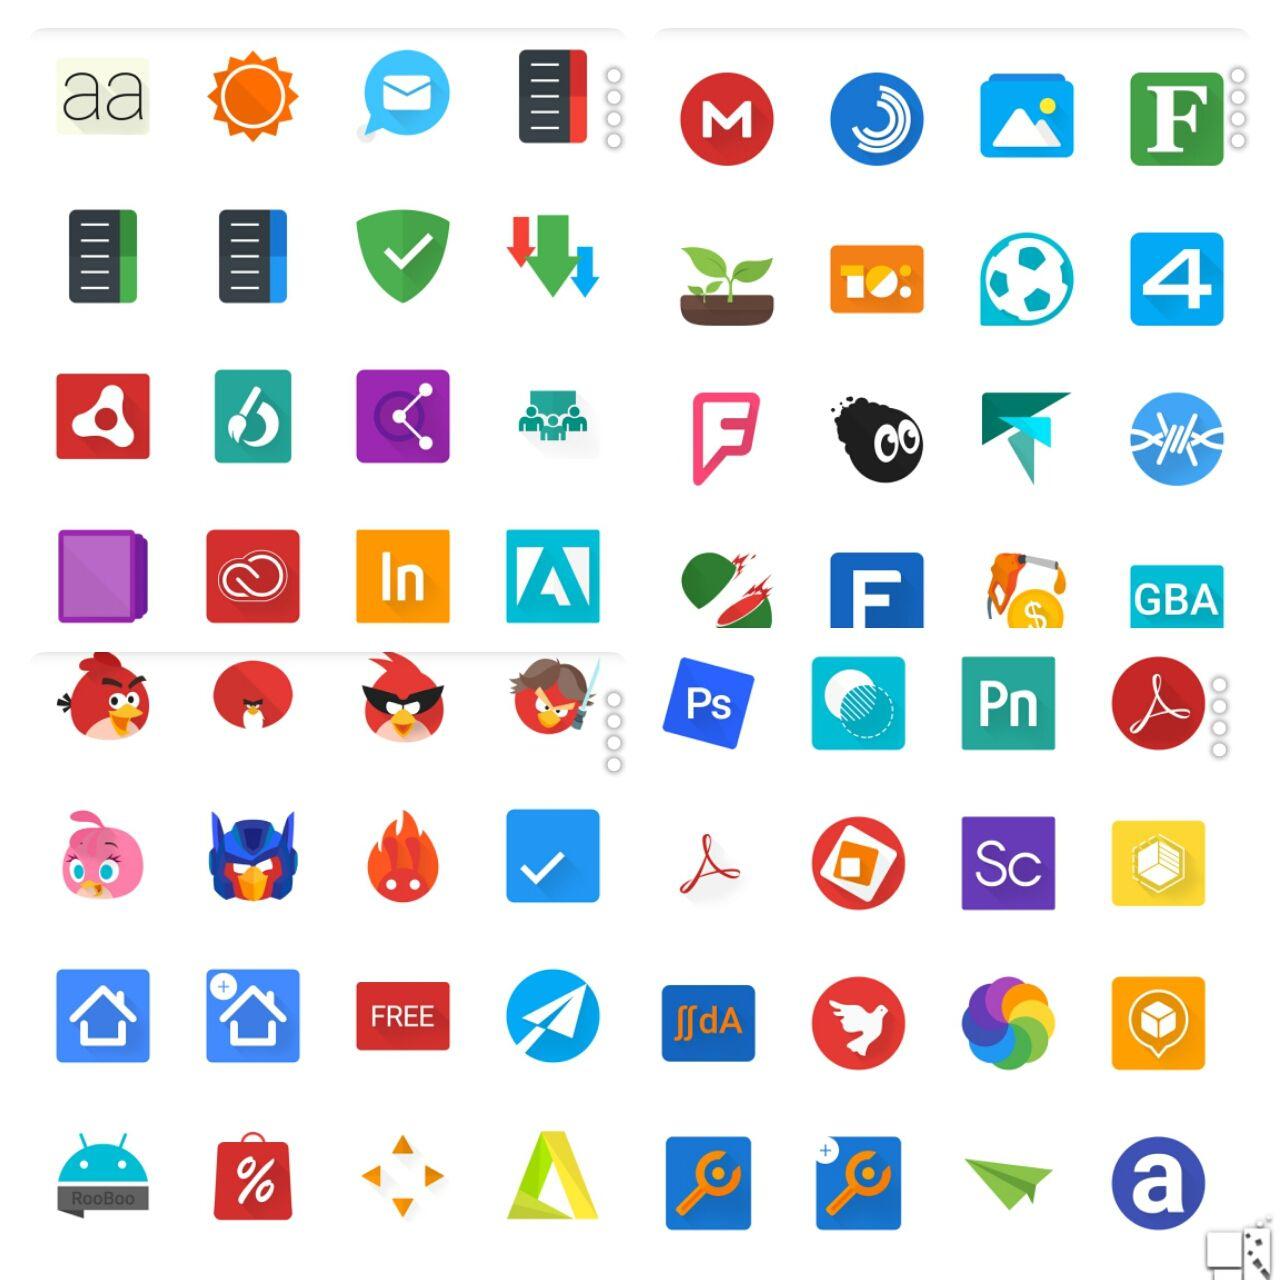 Most Popular App Logo - 5 ICON PACKS THAT YOU SHOULD HAVE | TechandroidBlogs